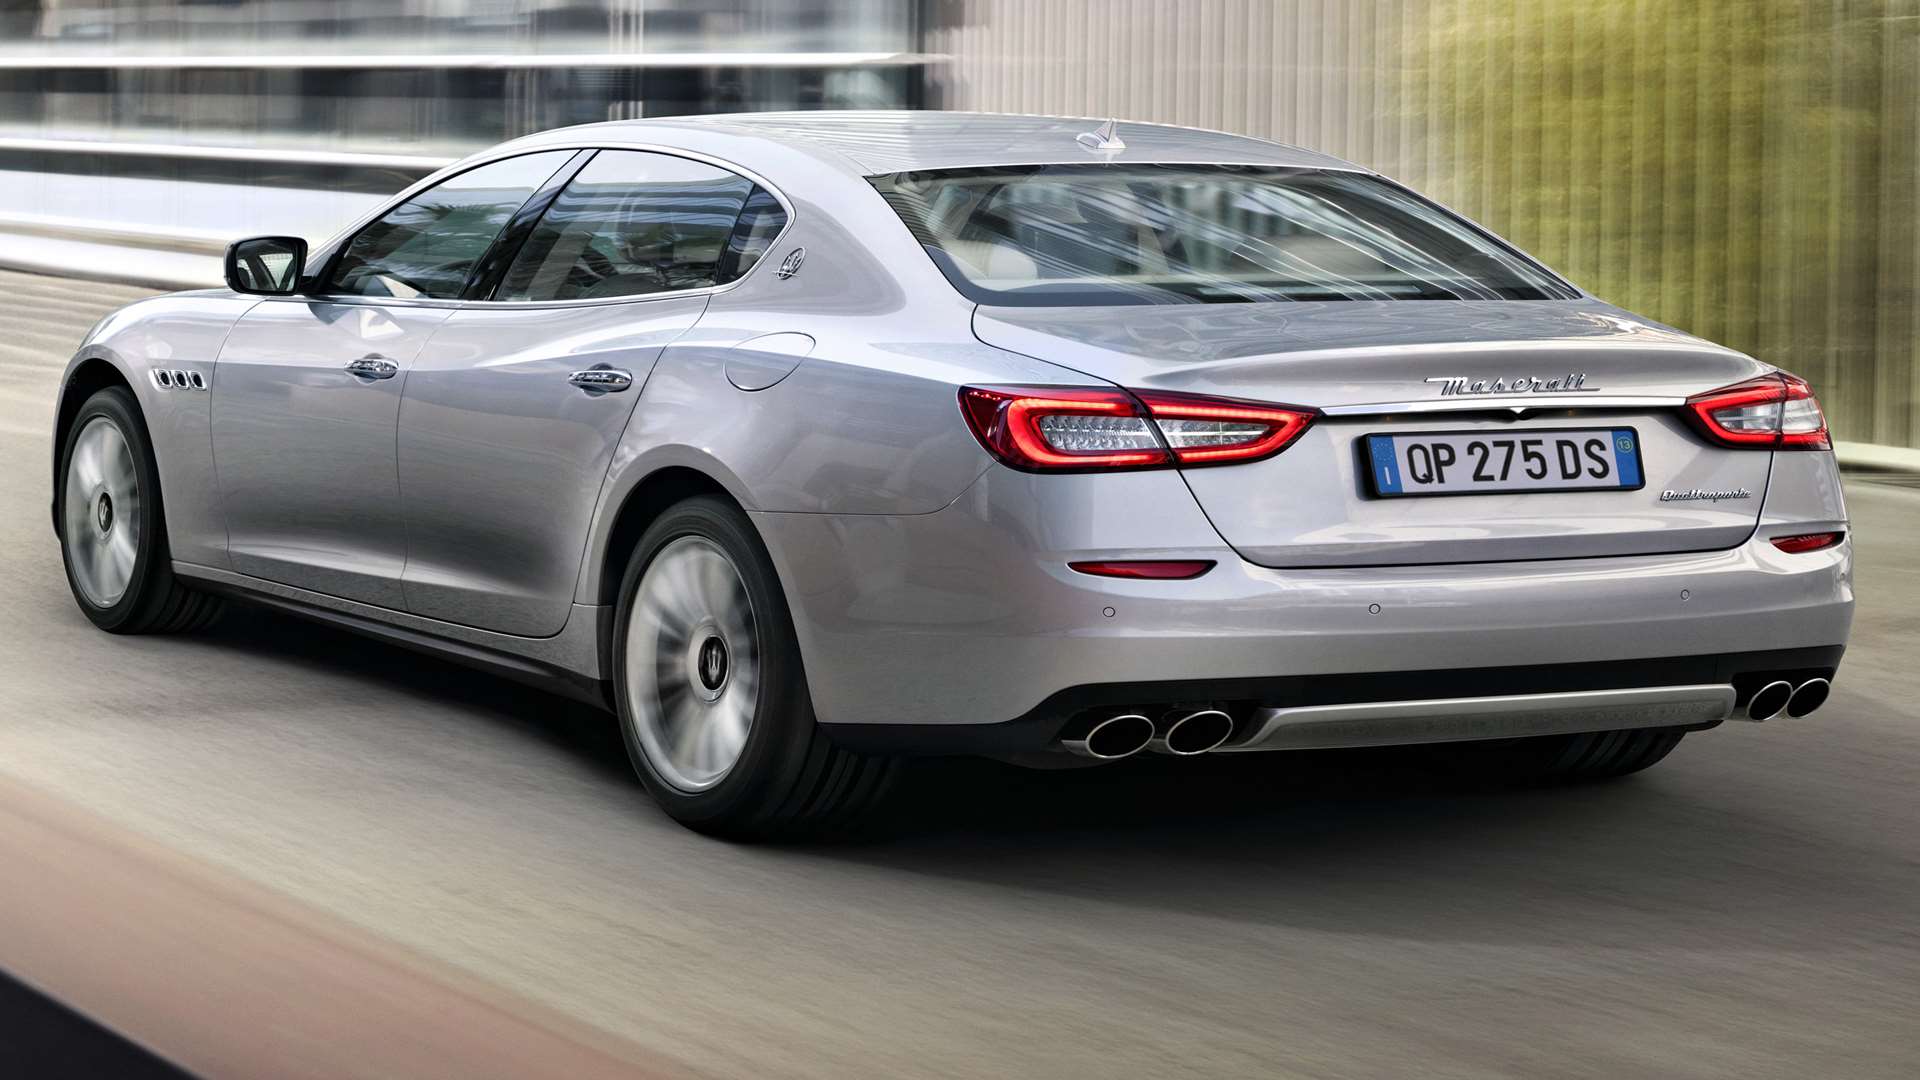 The Quattroporte is low-slung for a luxury saloon